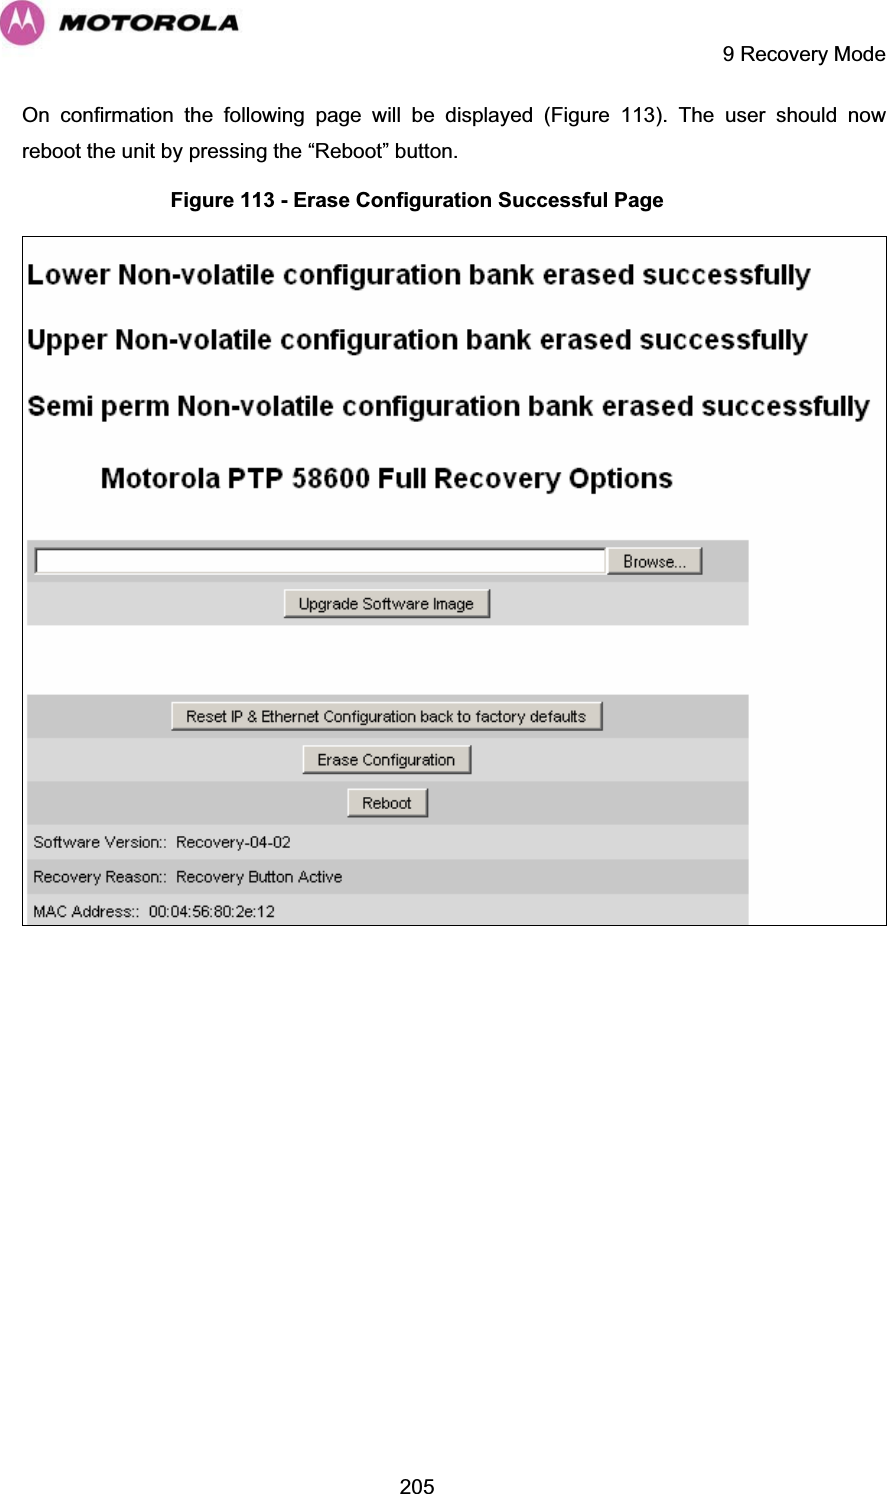     9 Recovery Mode  205On confirmation the following page will be displayed (Figure 113). The user should now reboot the unit by pressing the “Reboot” button. Figure 113 - Erase Configuration Successful Page   